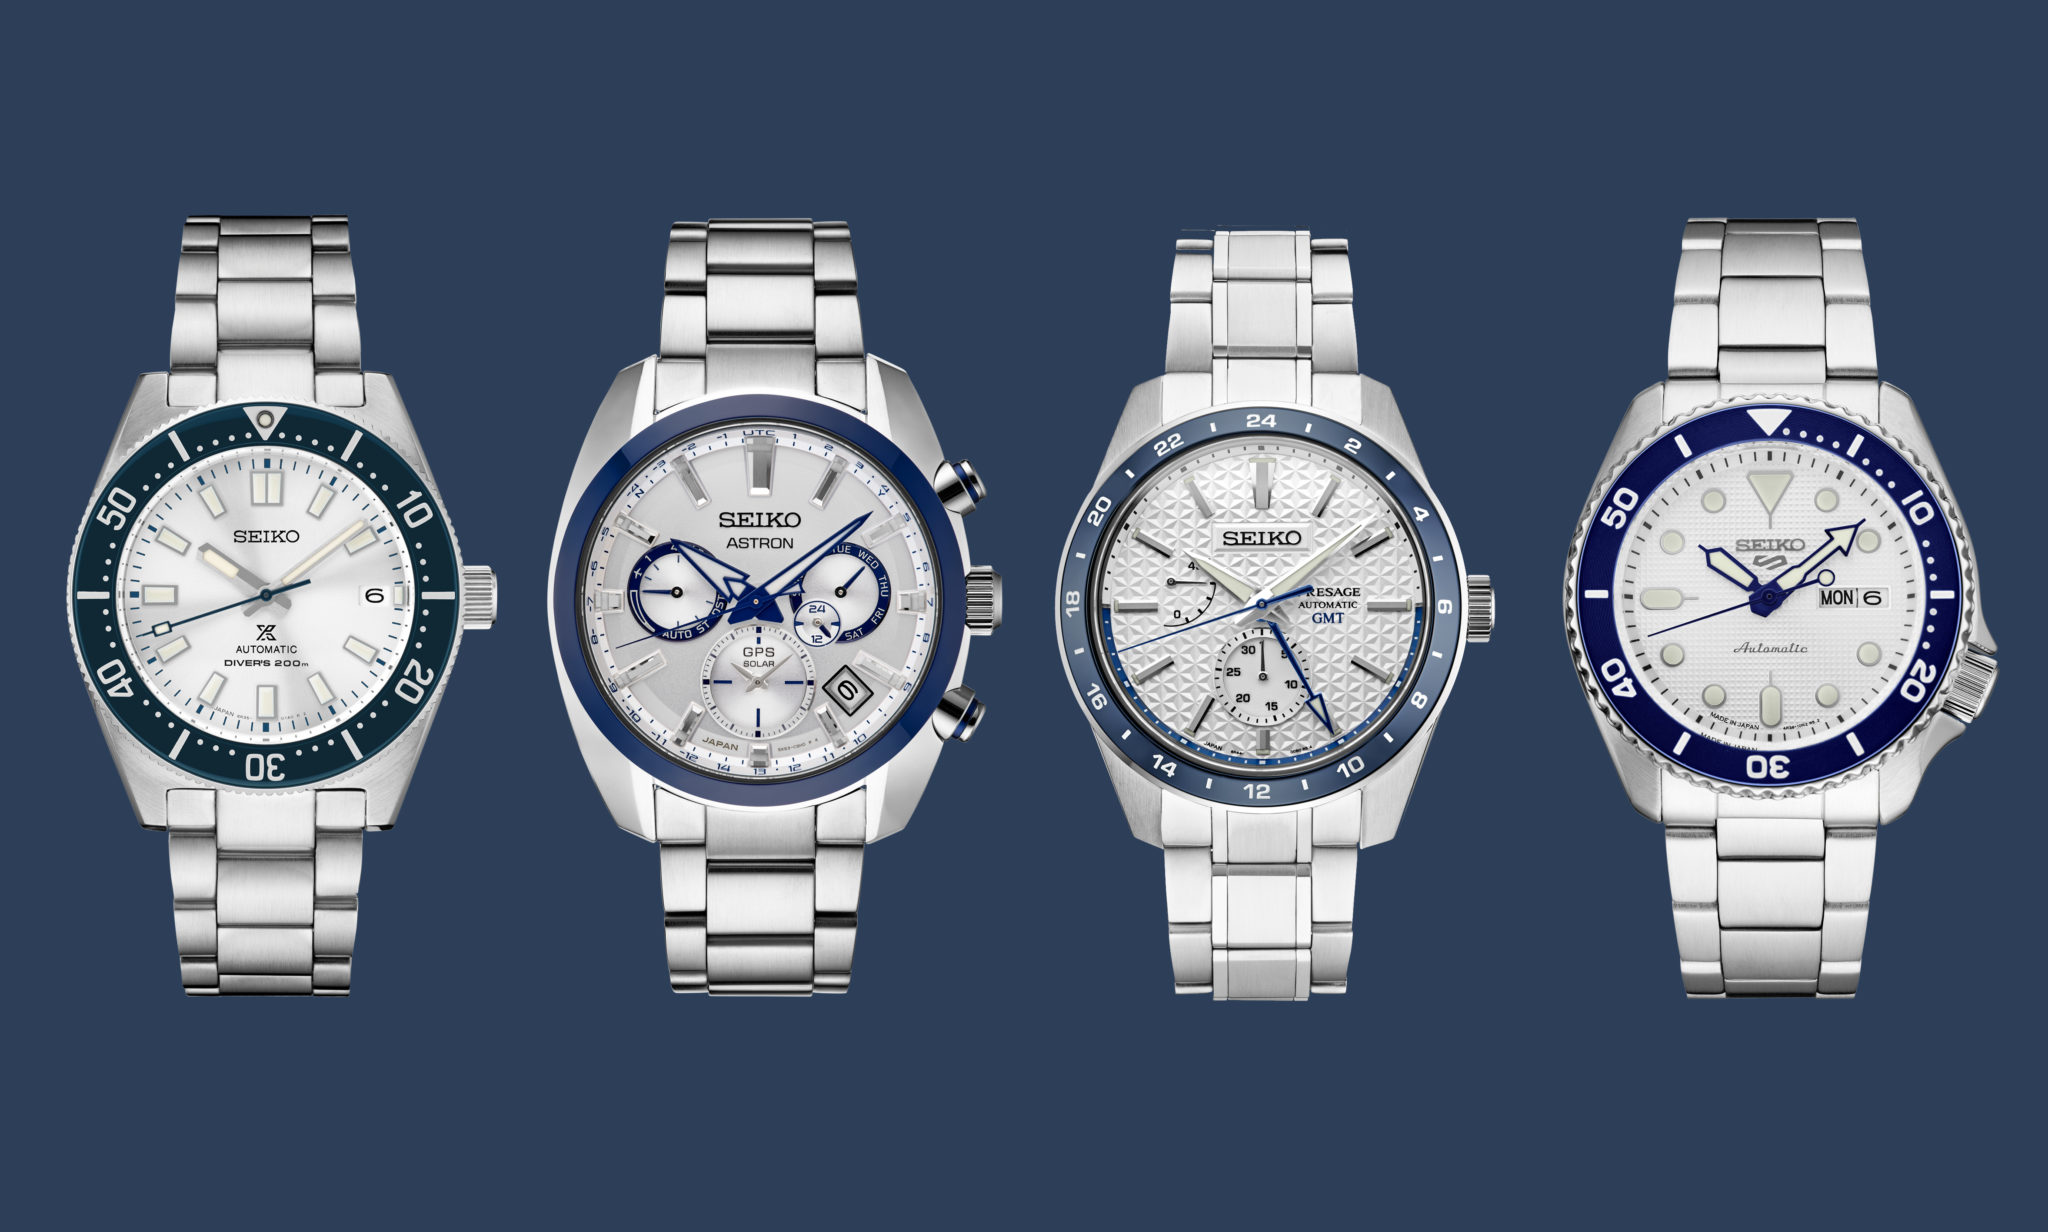 Fresh faces for the summer of Seiko's 140th anniversary year